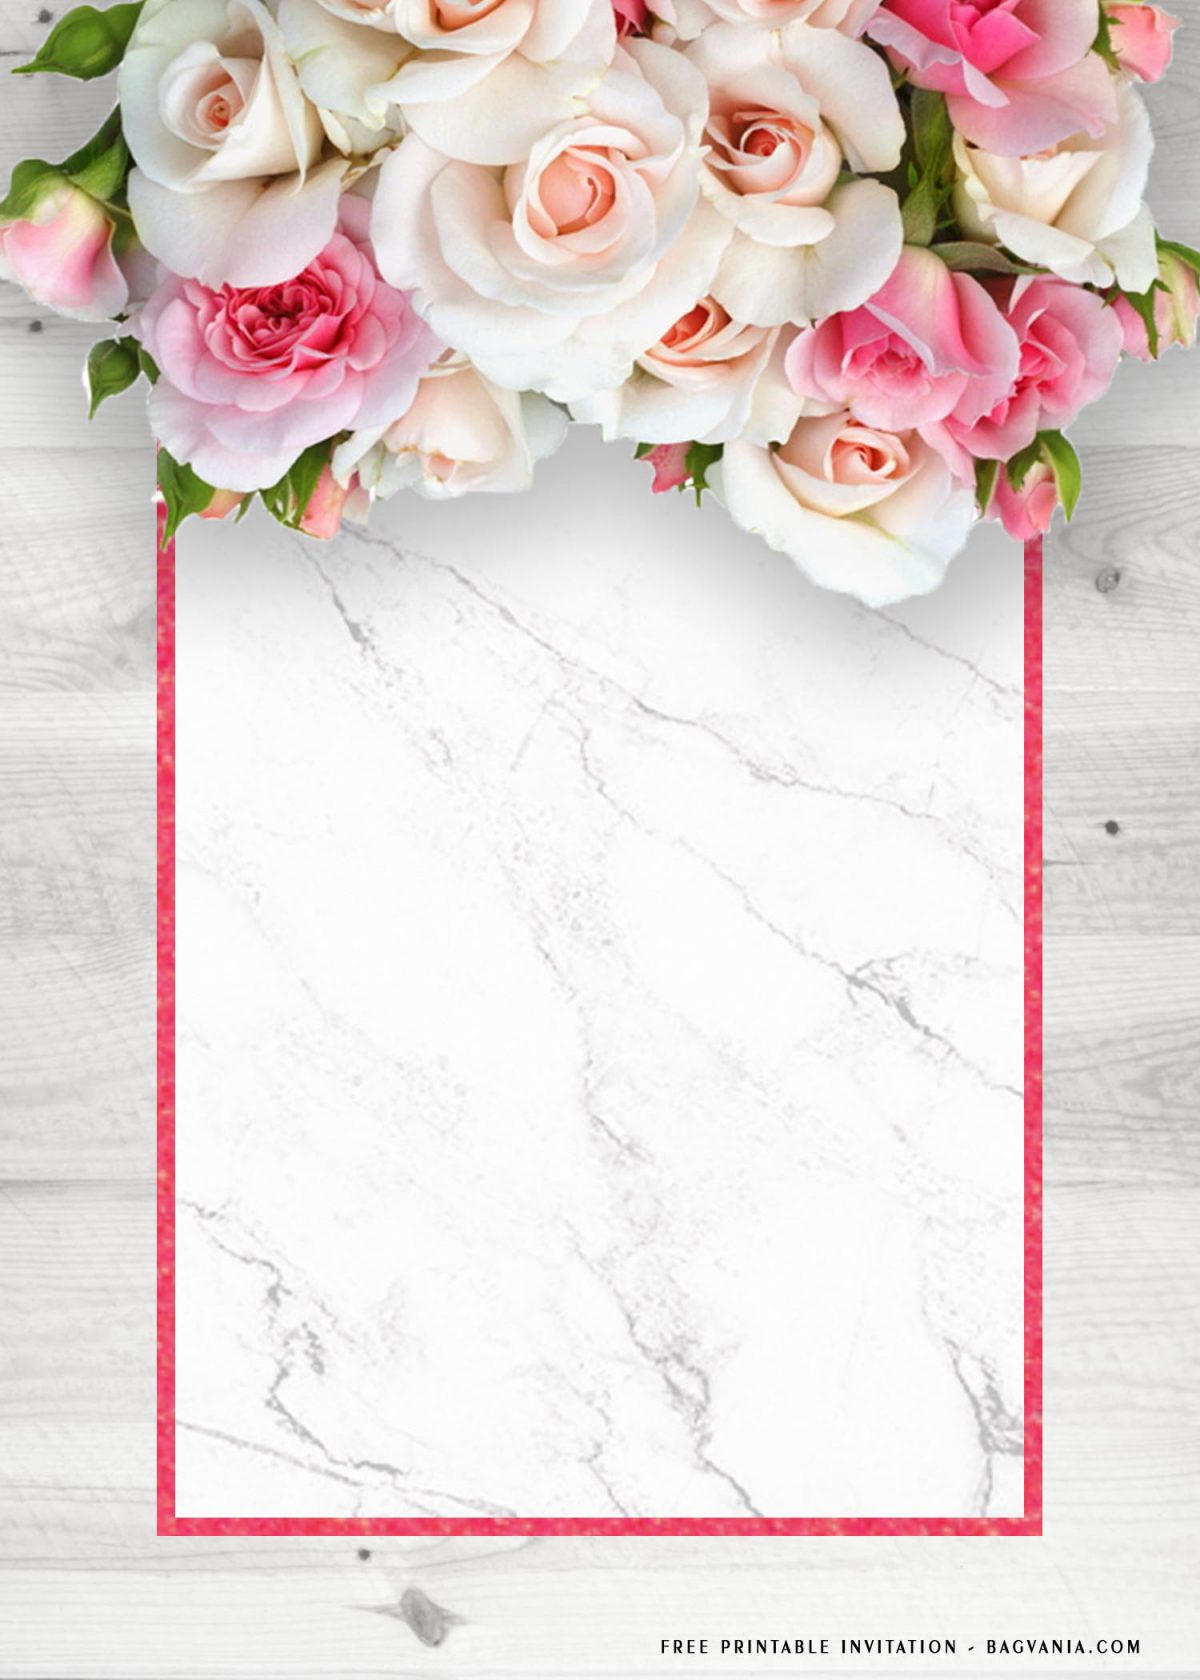 Free Printable Floral Frame On Wooden Baby Shower Invitation Templates With White Roses